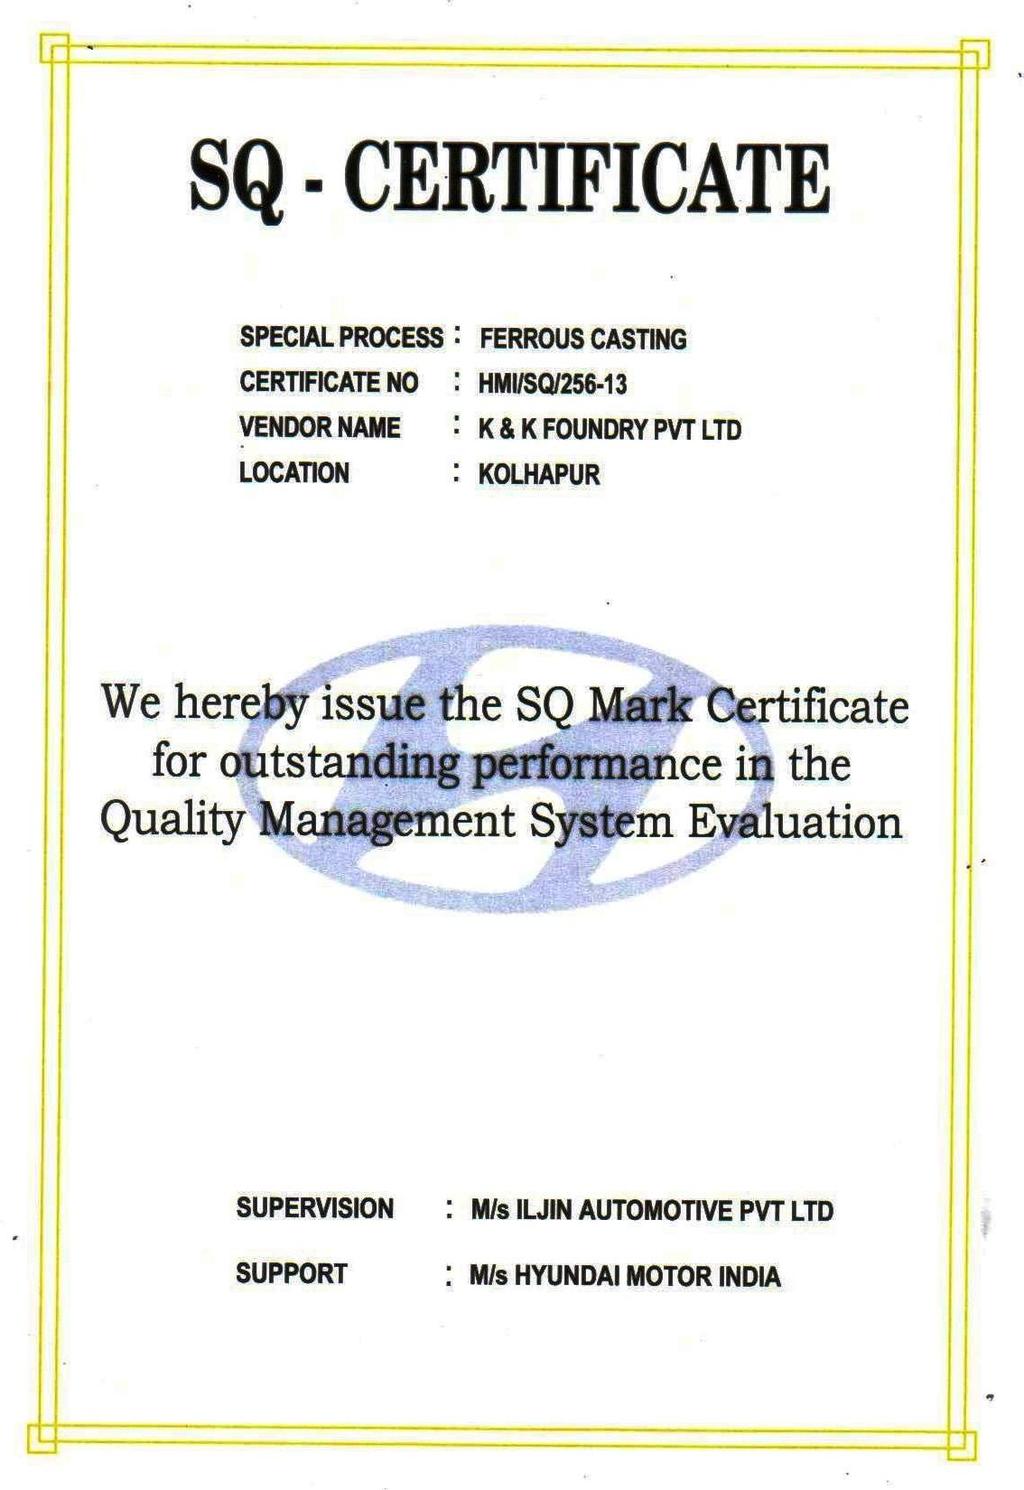 Achievements SQ Certification Hyundai Motors India Limited The SQ - Mark recognizes the technical skills and high-quality level of the products.